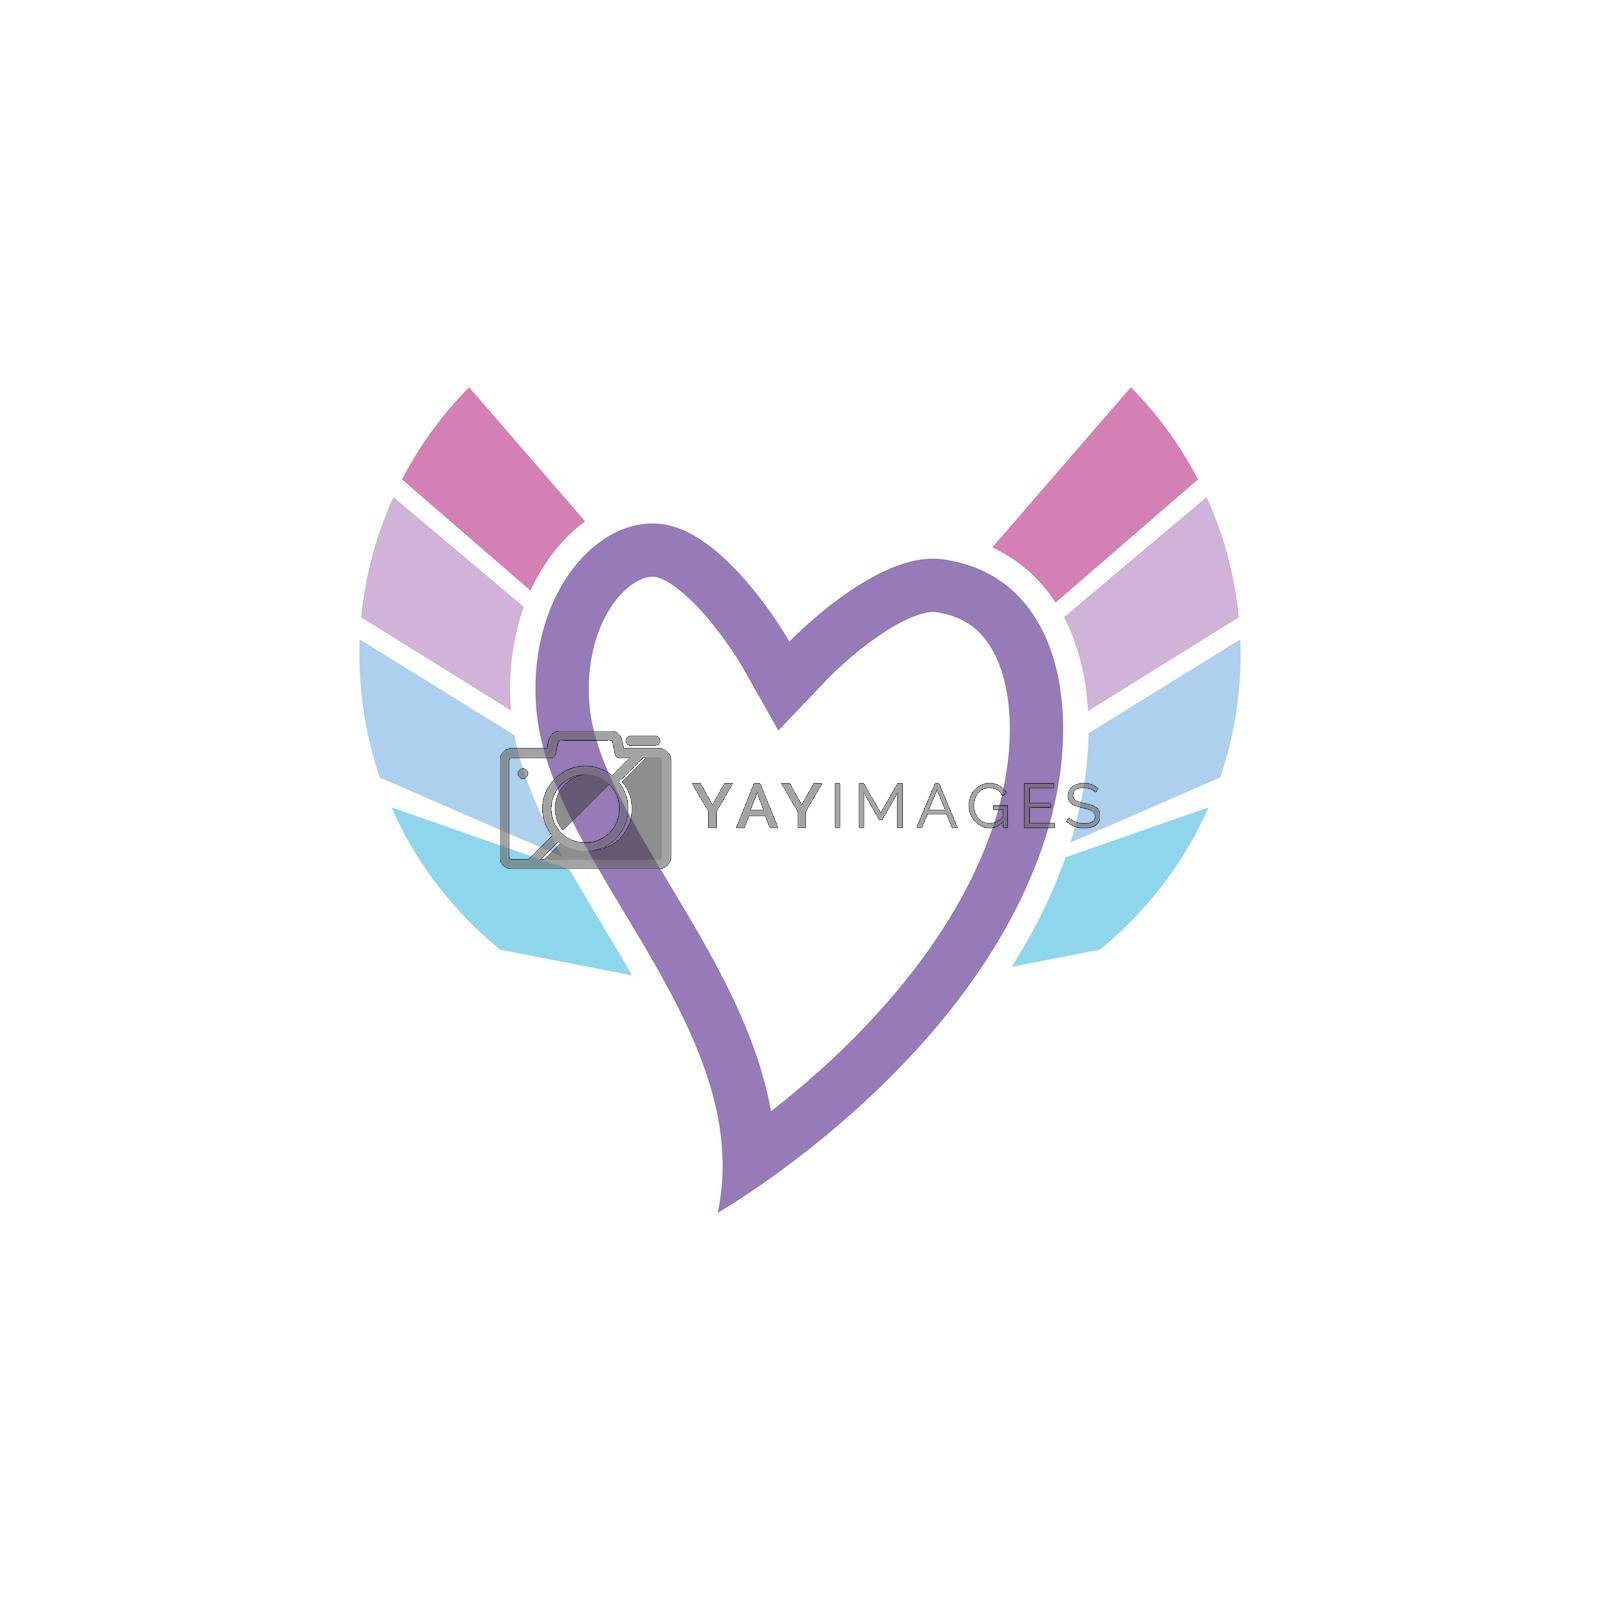 Royalty free image of Love logo vector illustration by awk